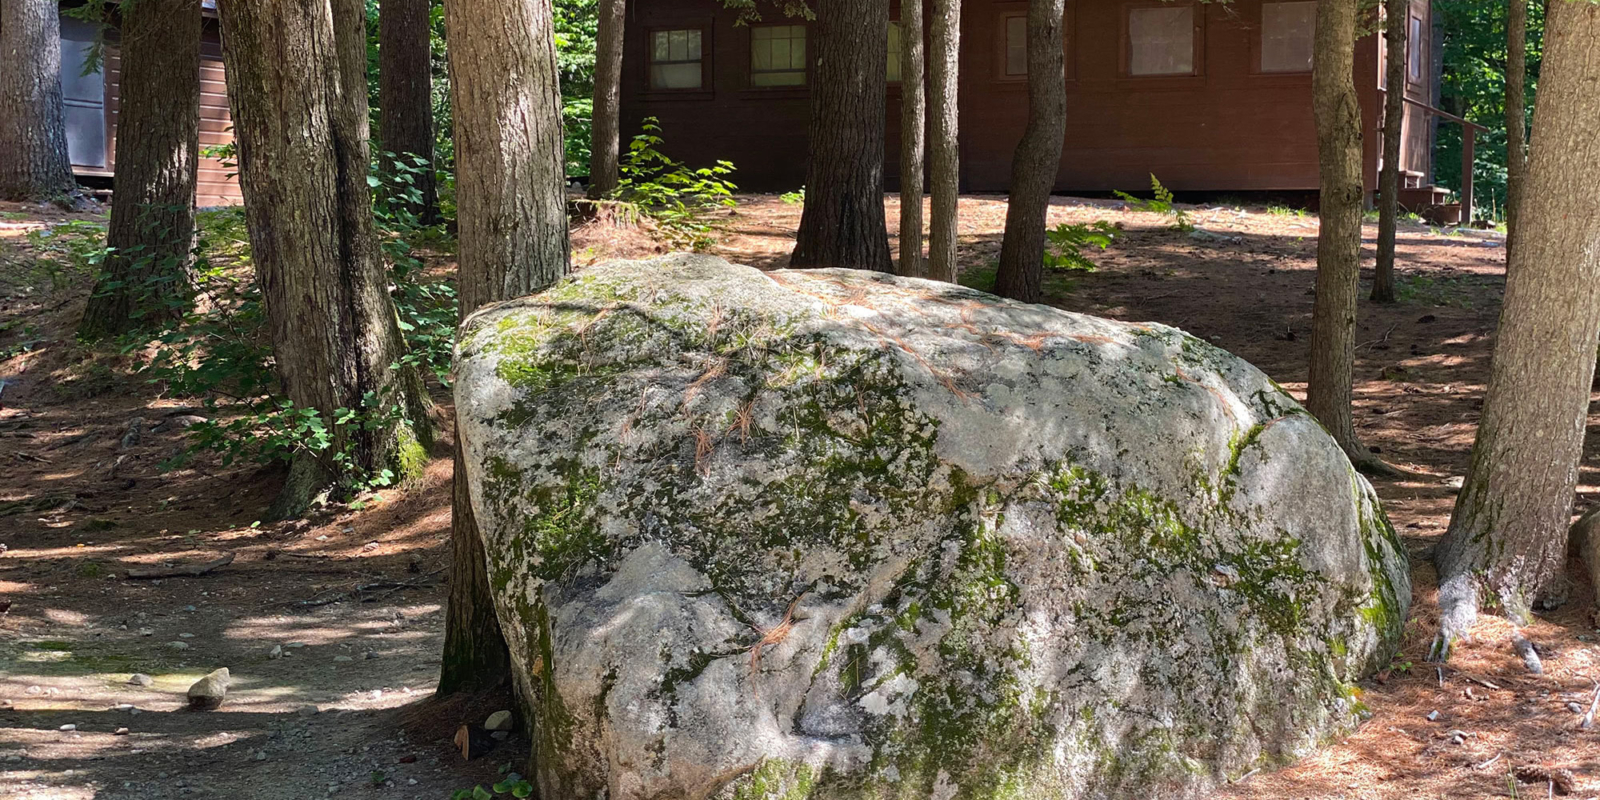 The large rock covered in moss by the entrance to Camp Walden.